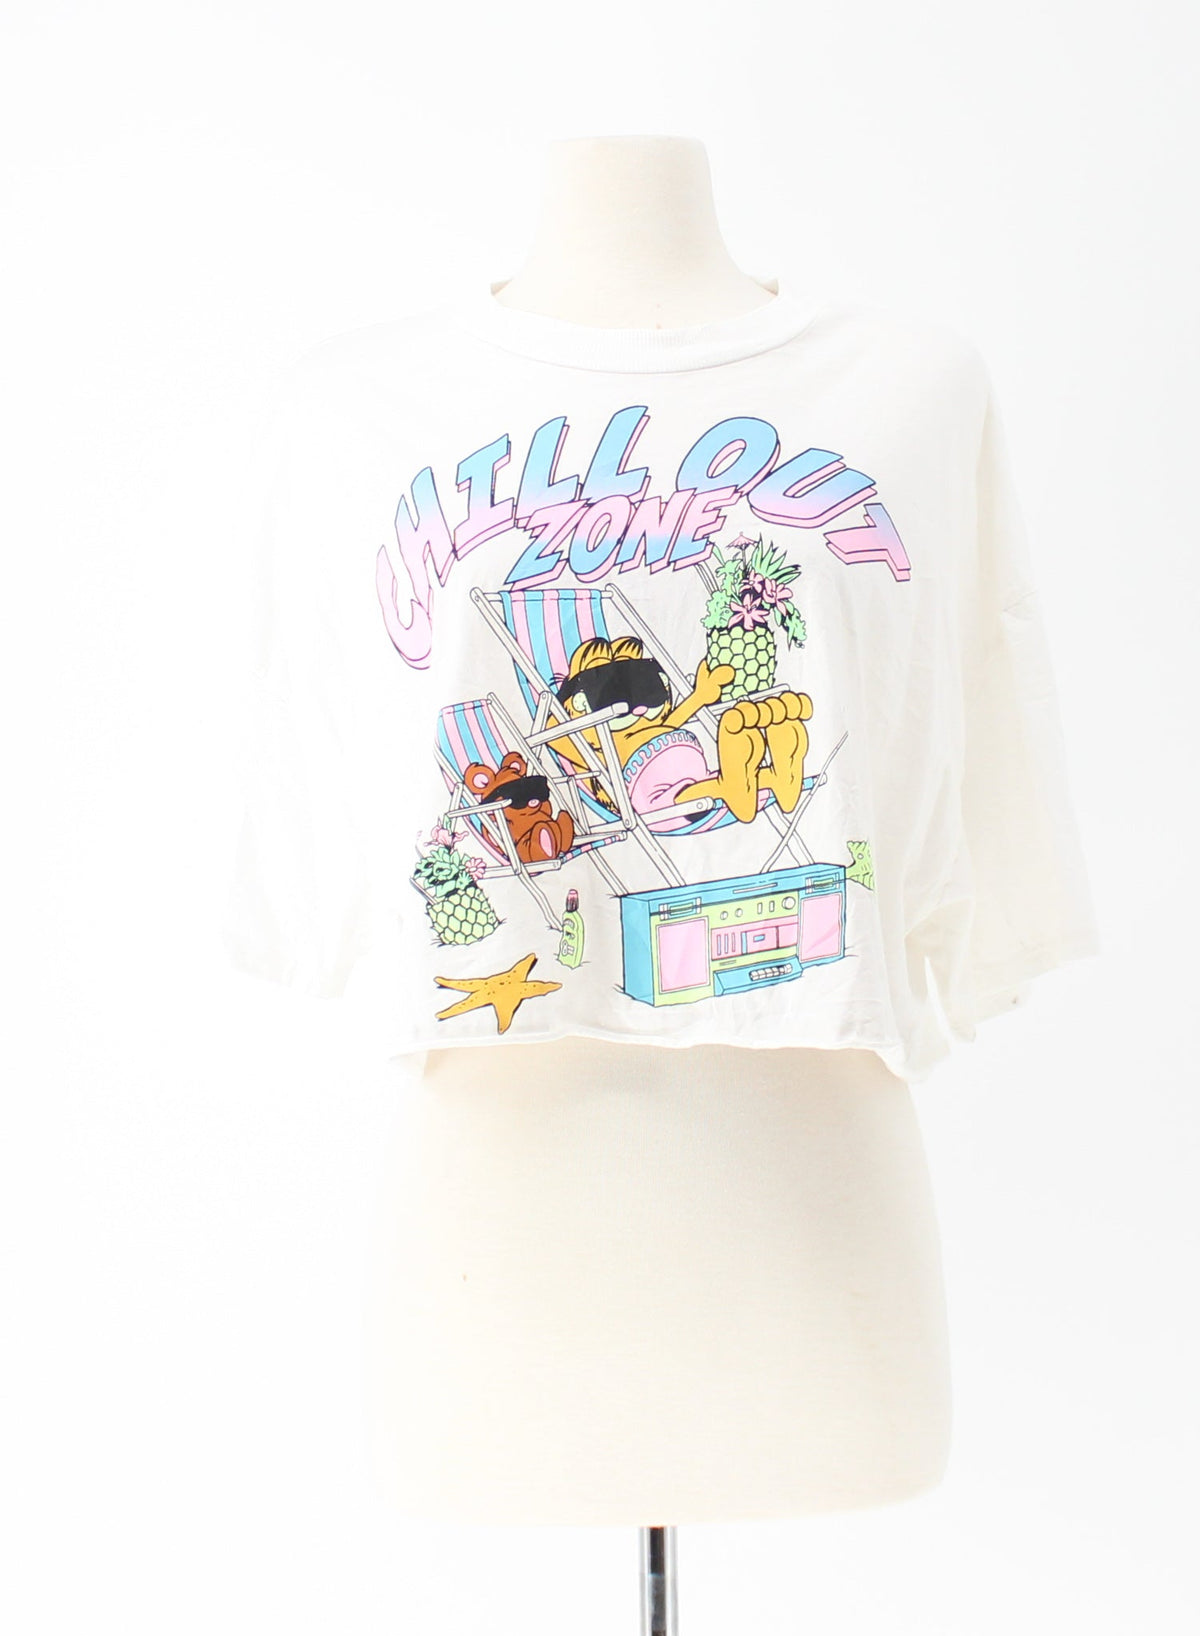 H&M Divided Chillout Zone Garfield Tee